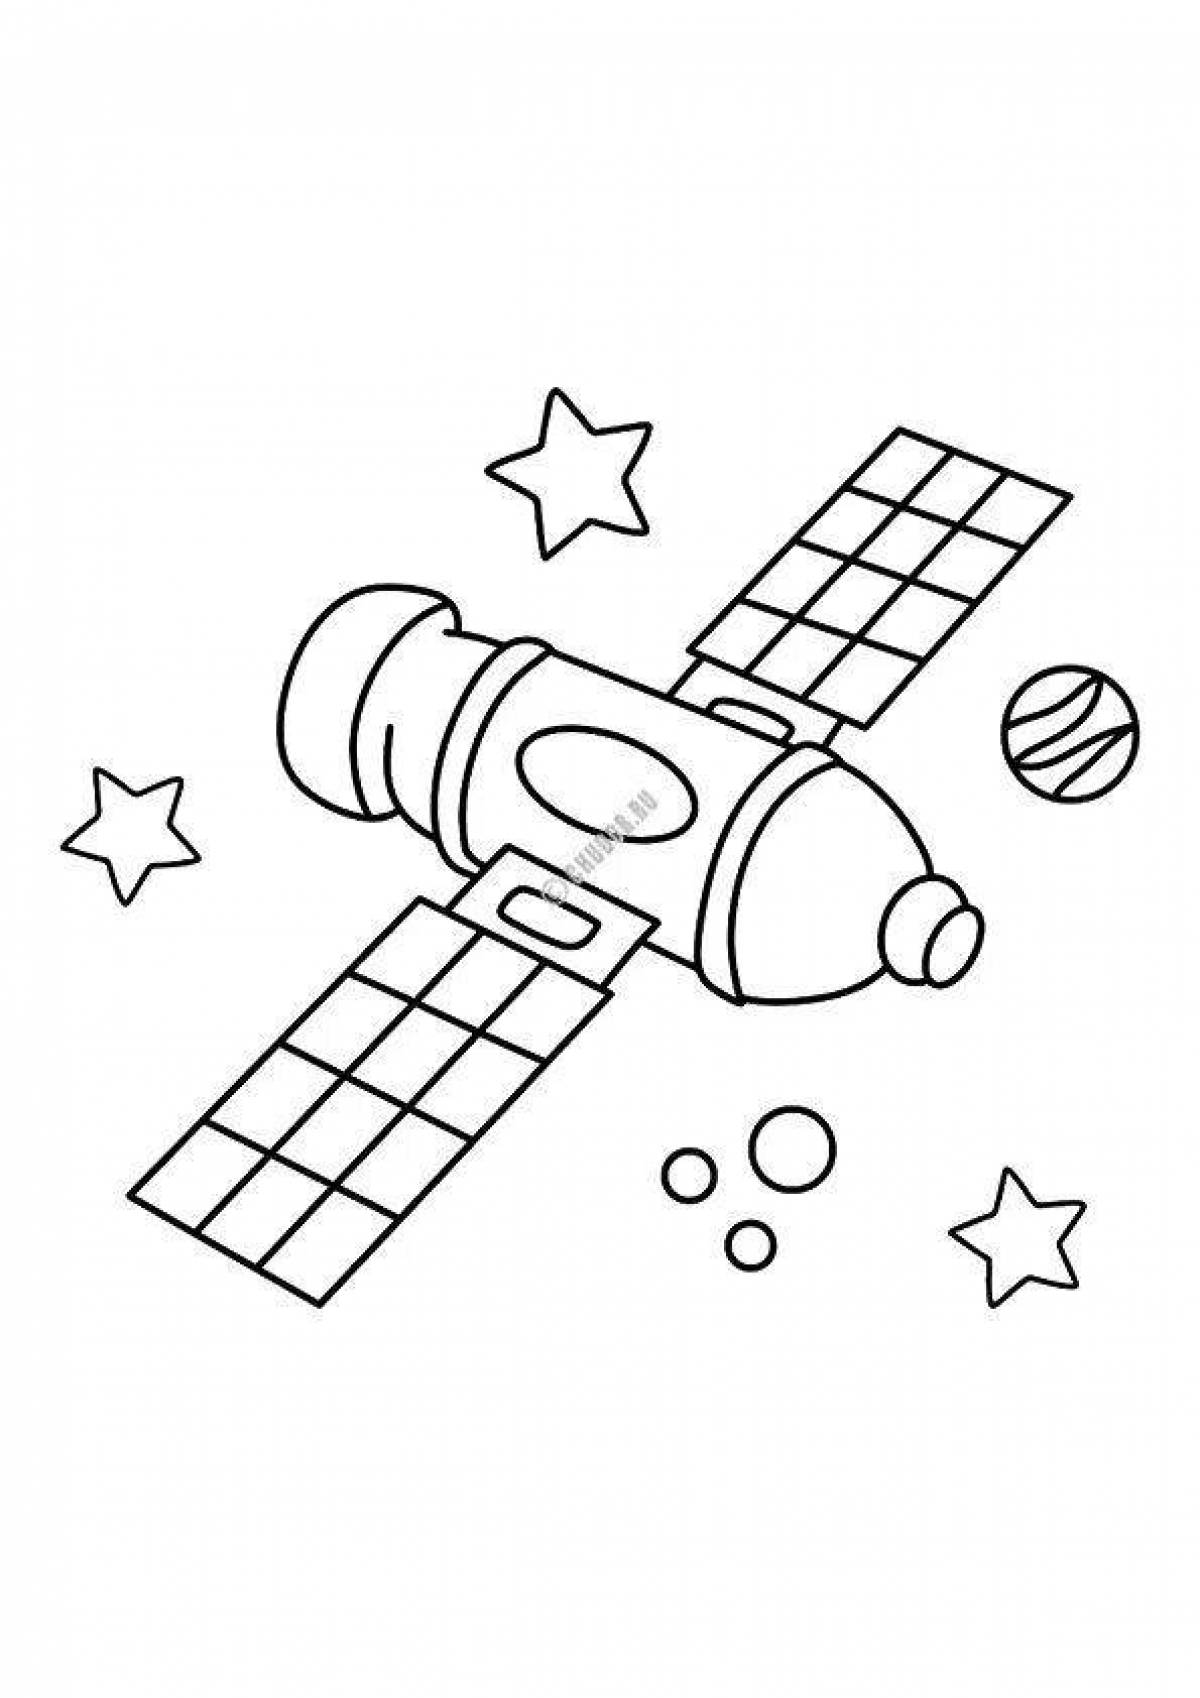 Grand satellite coloring page